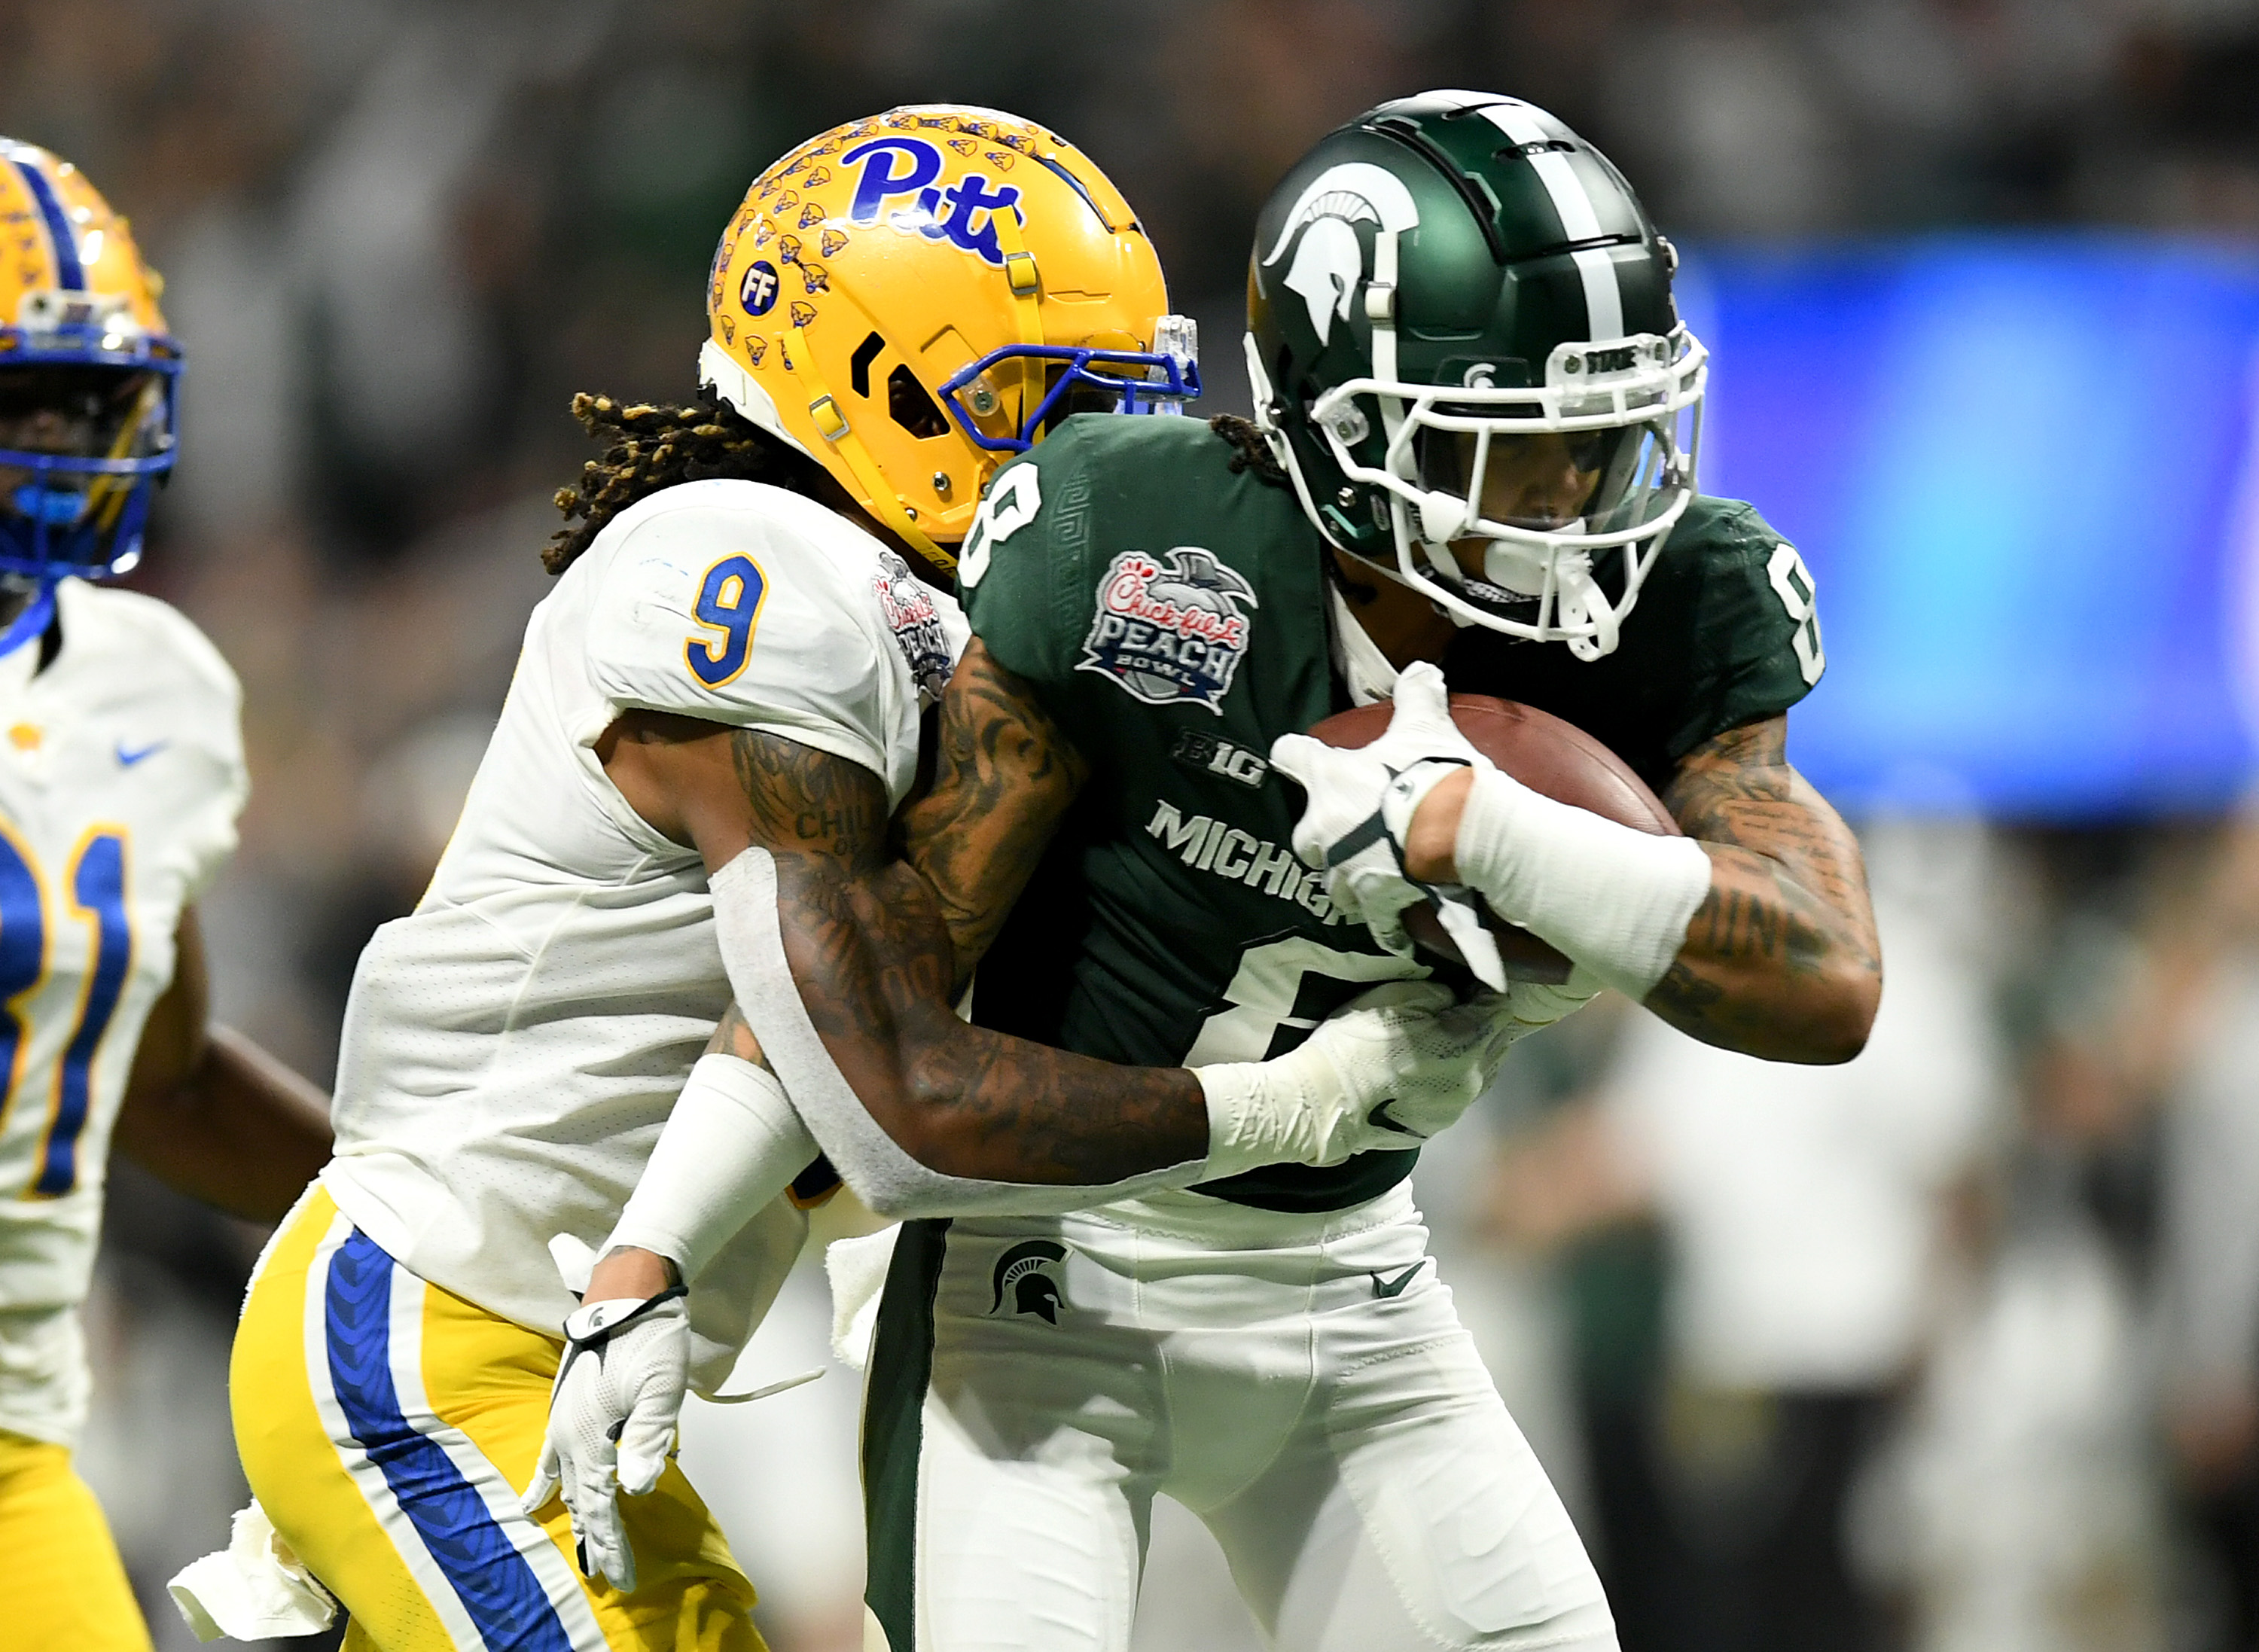 Michigan State Football 2022 Schedule Here Is Michigan State Football's New 2022 Schedule, With Michigan Game In  Ann Arbor